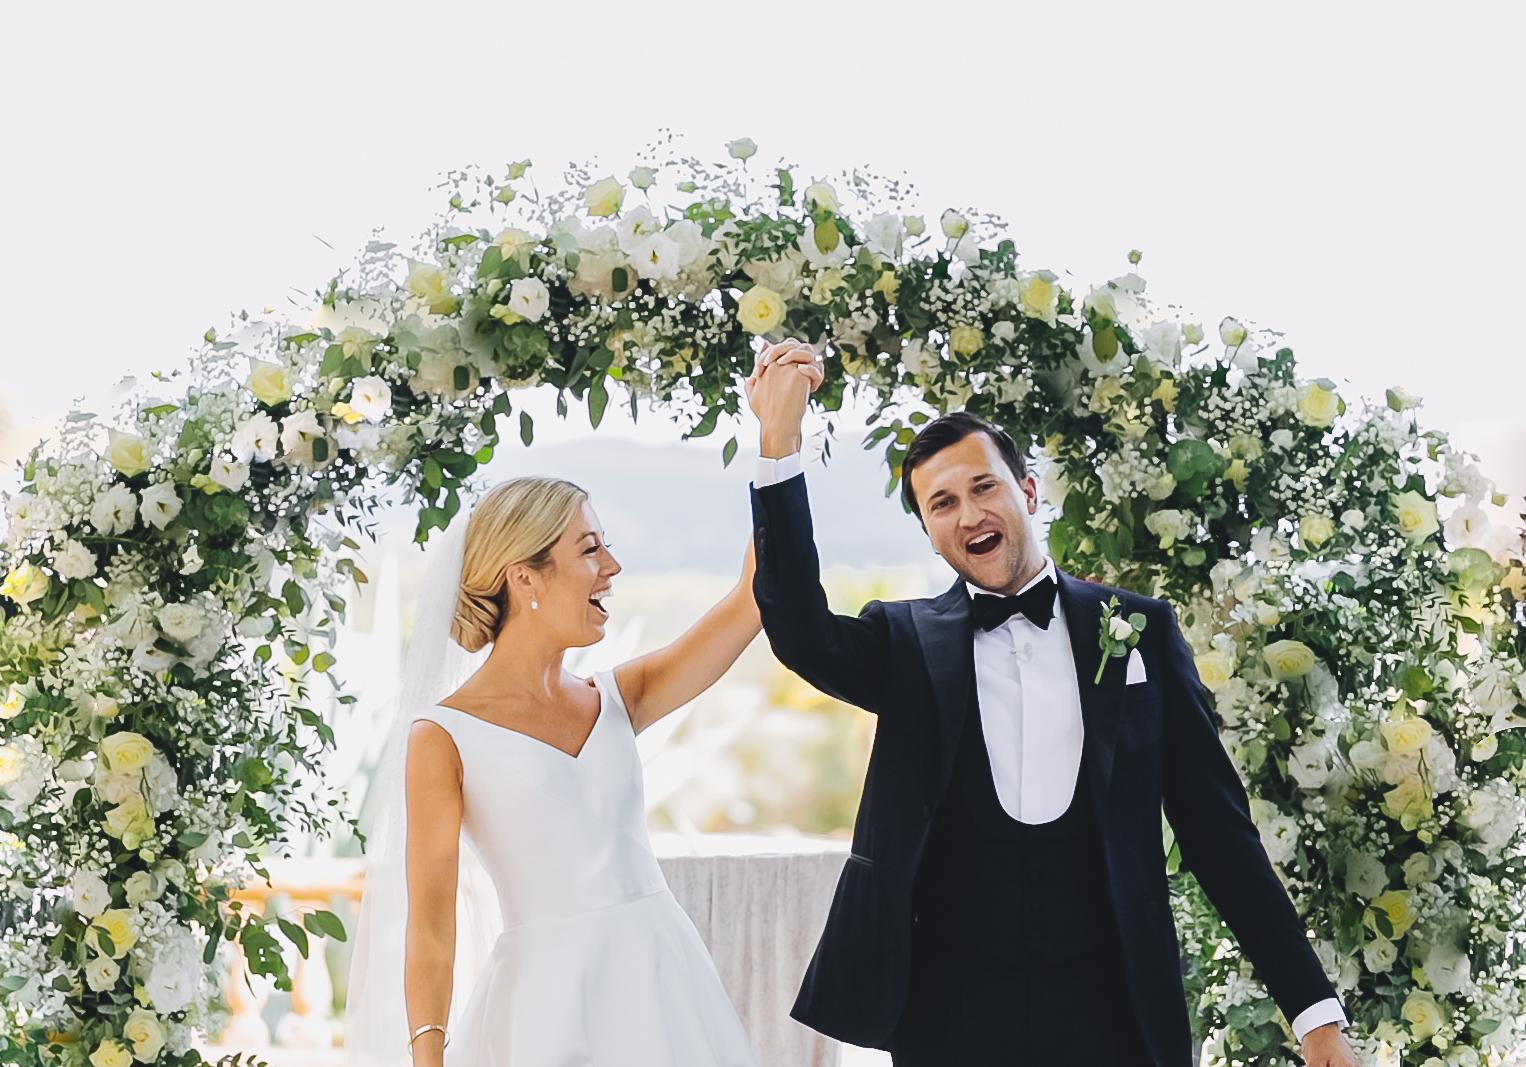 5 Ideas for Posing on Your Wedding Videos